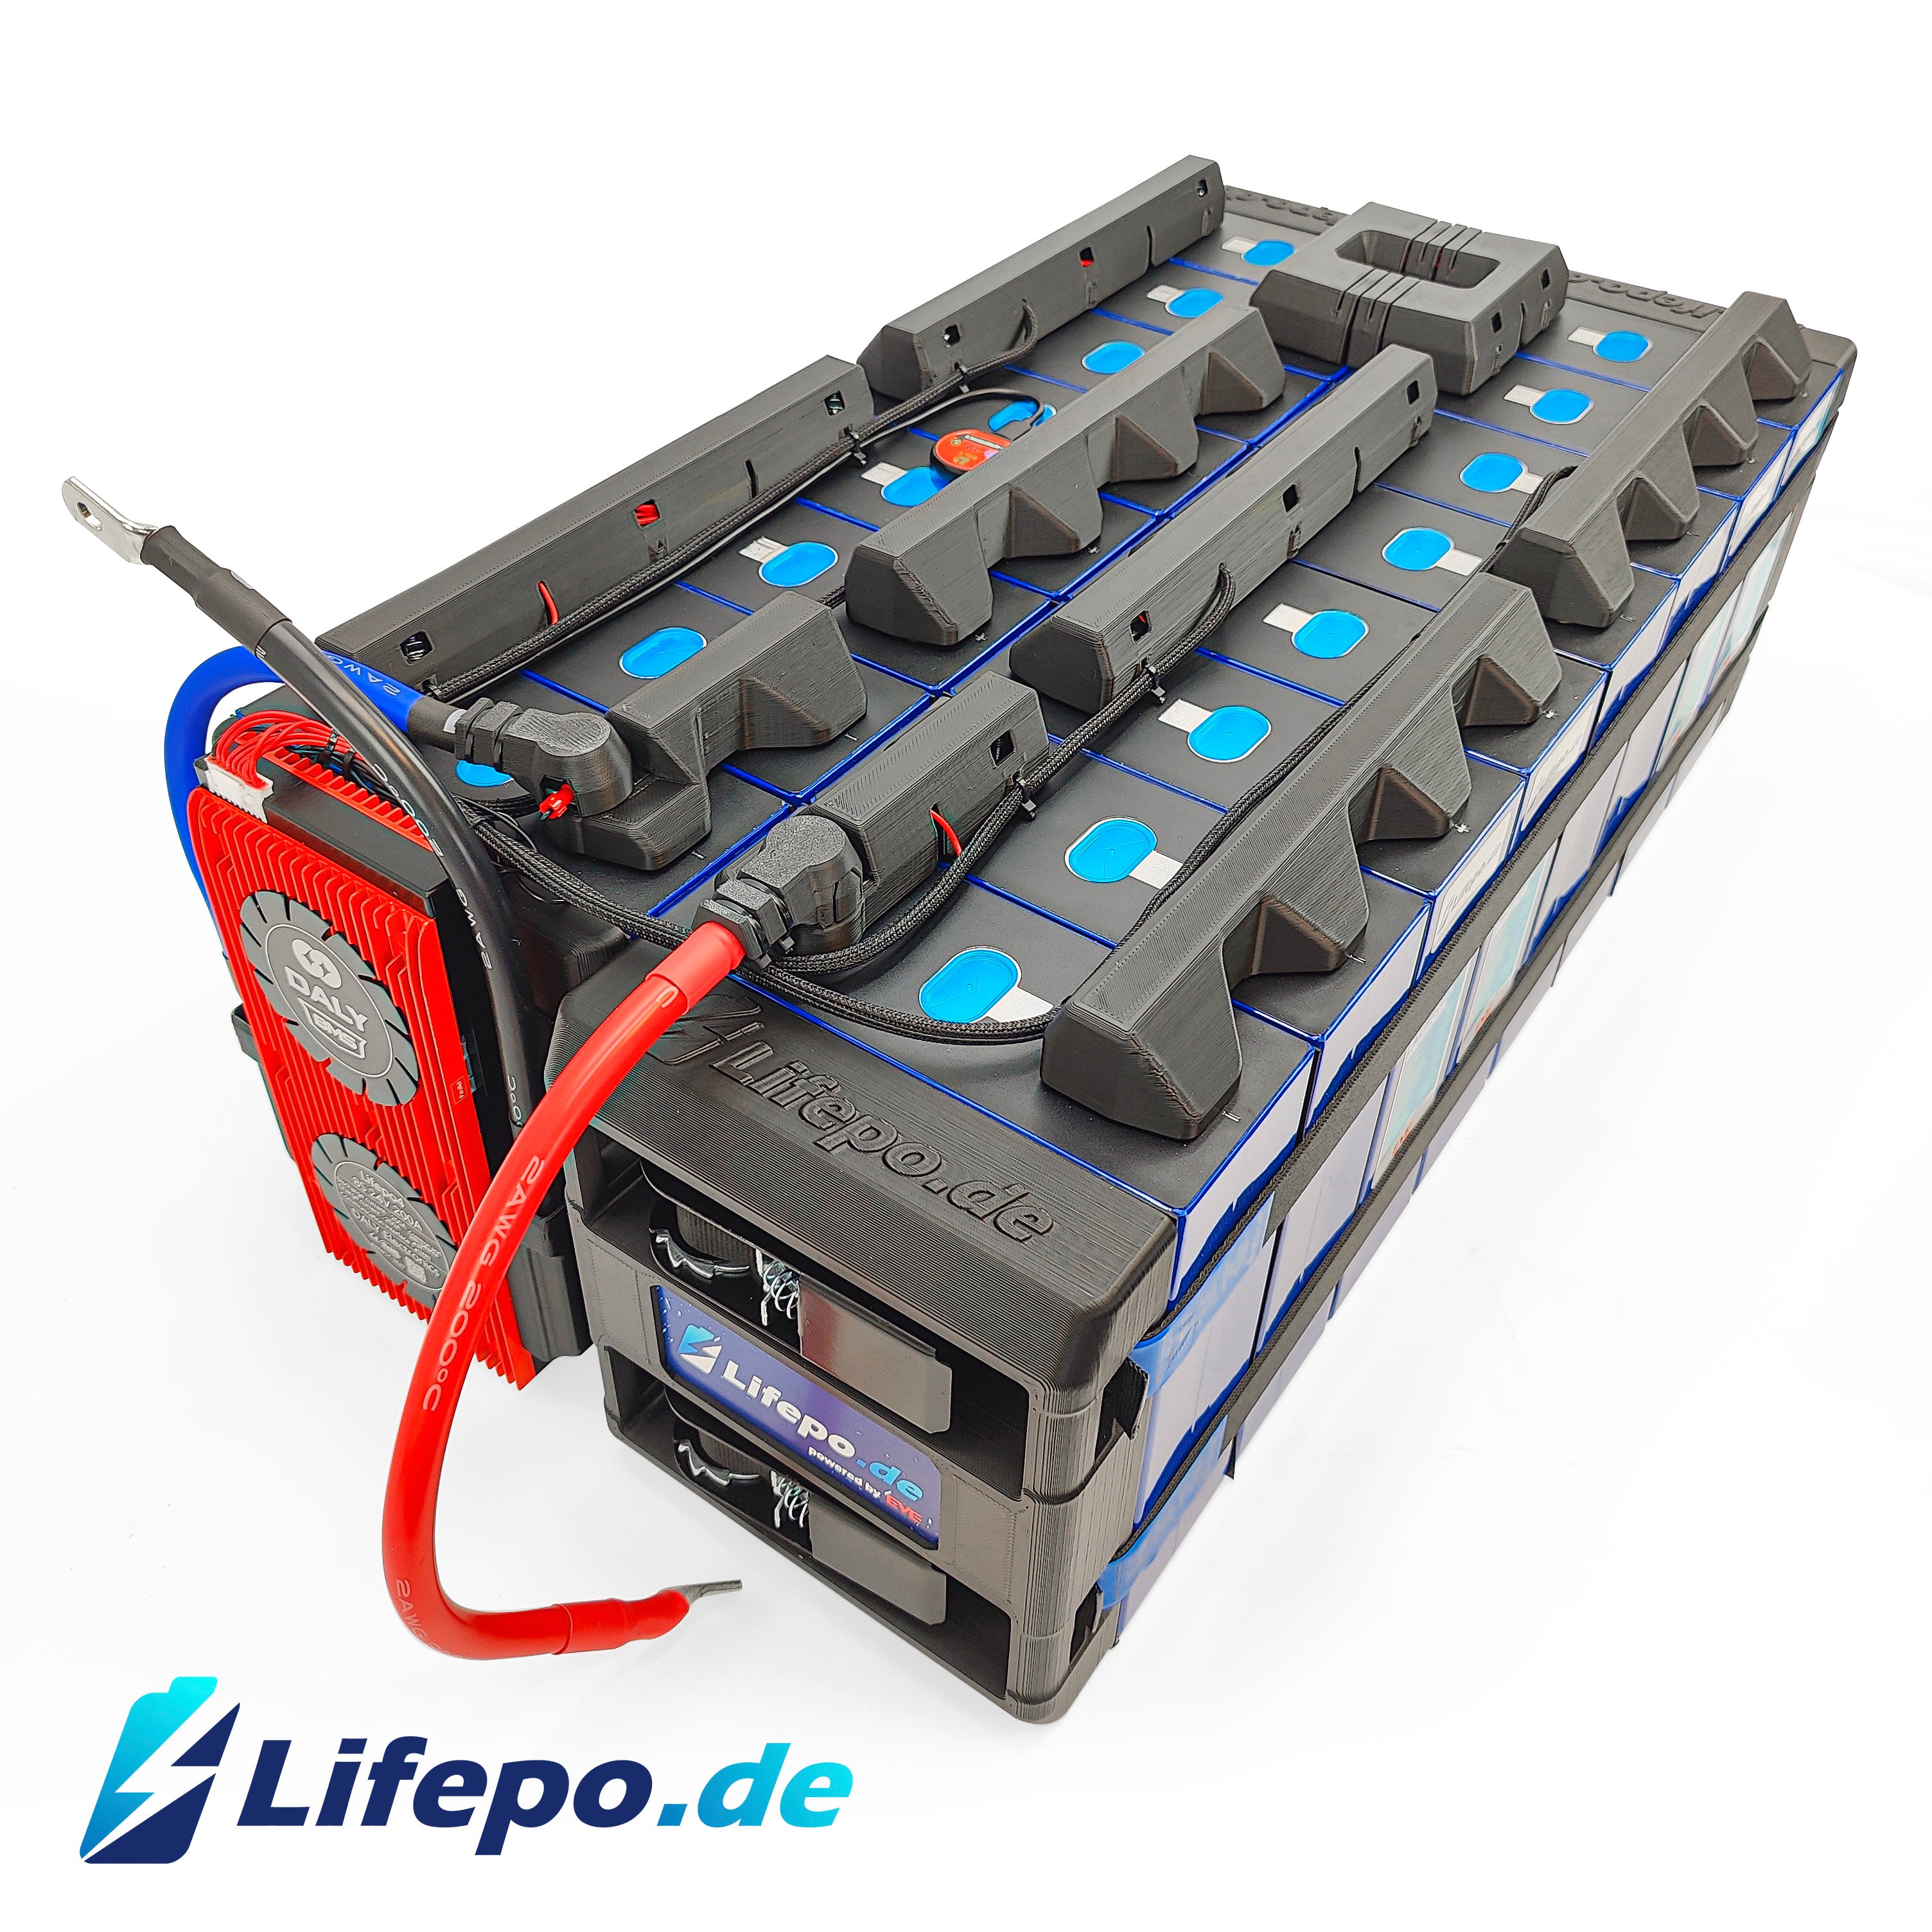 24v 560Ah Lifepo4 battery system with EVE Grade A+ 14.3kWh